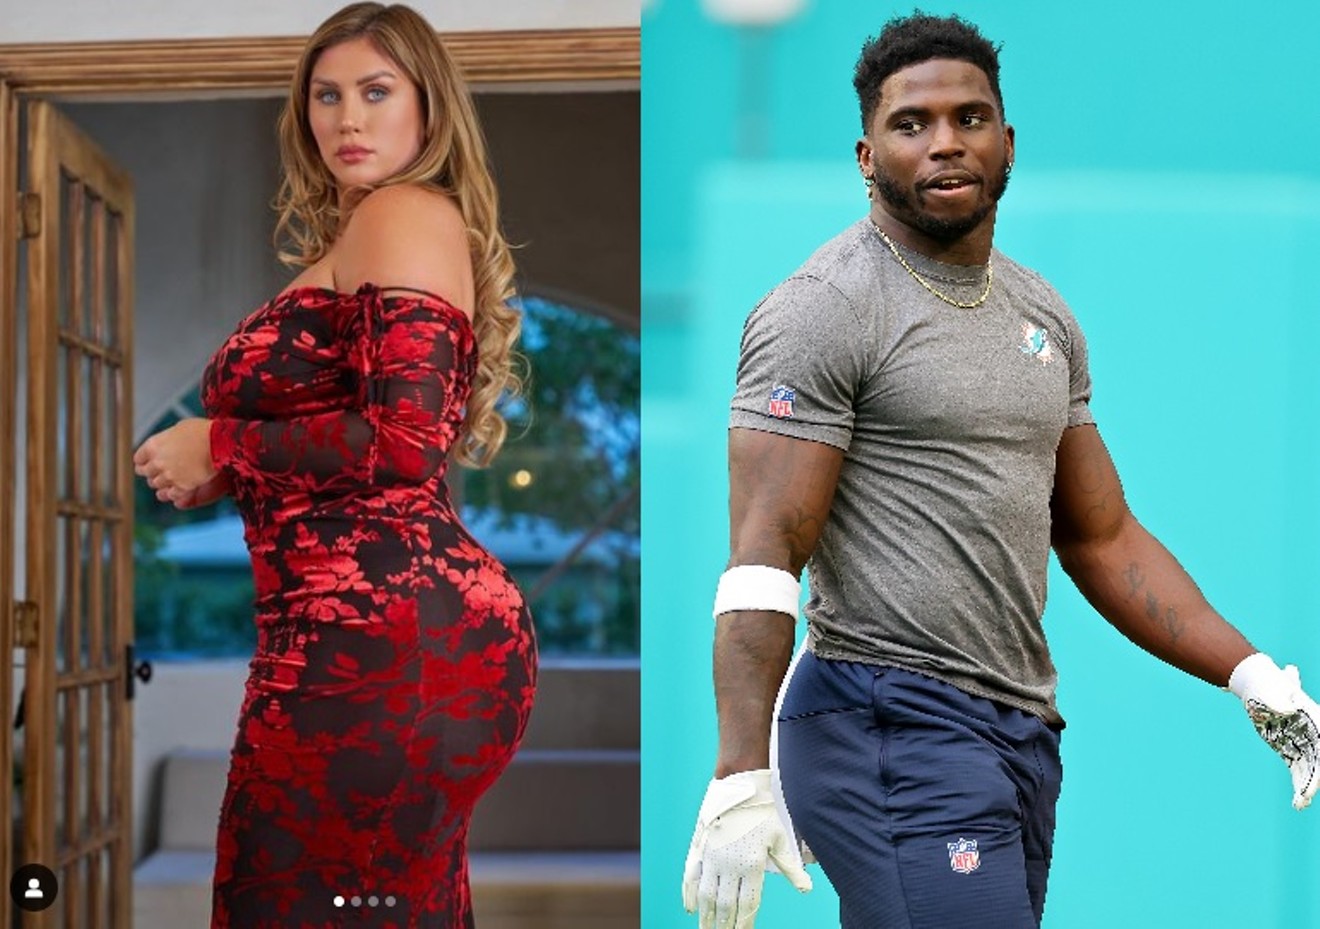 Instagram model Sophie Hall is suing Miami Dolphins player Tyreek Hill over an incident in which he allegedly broke her leg during a simulated football play.